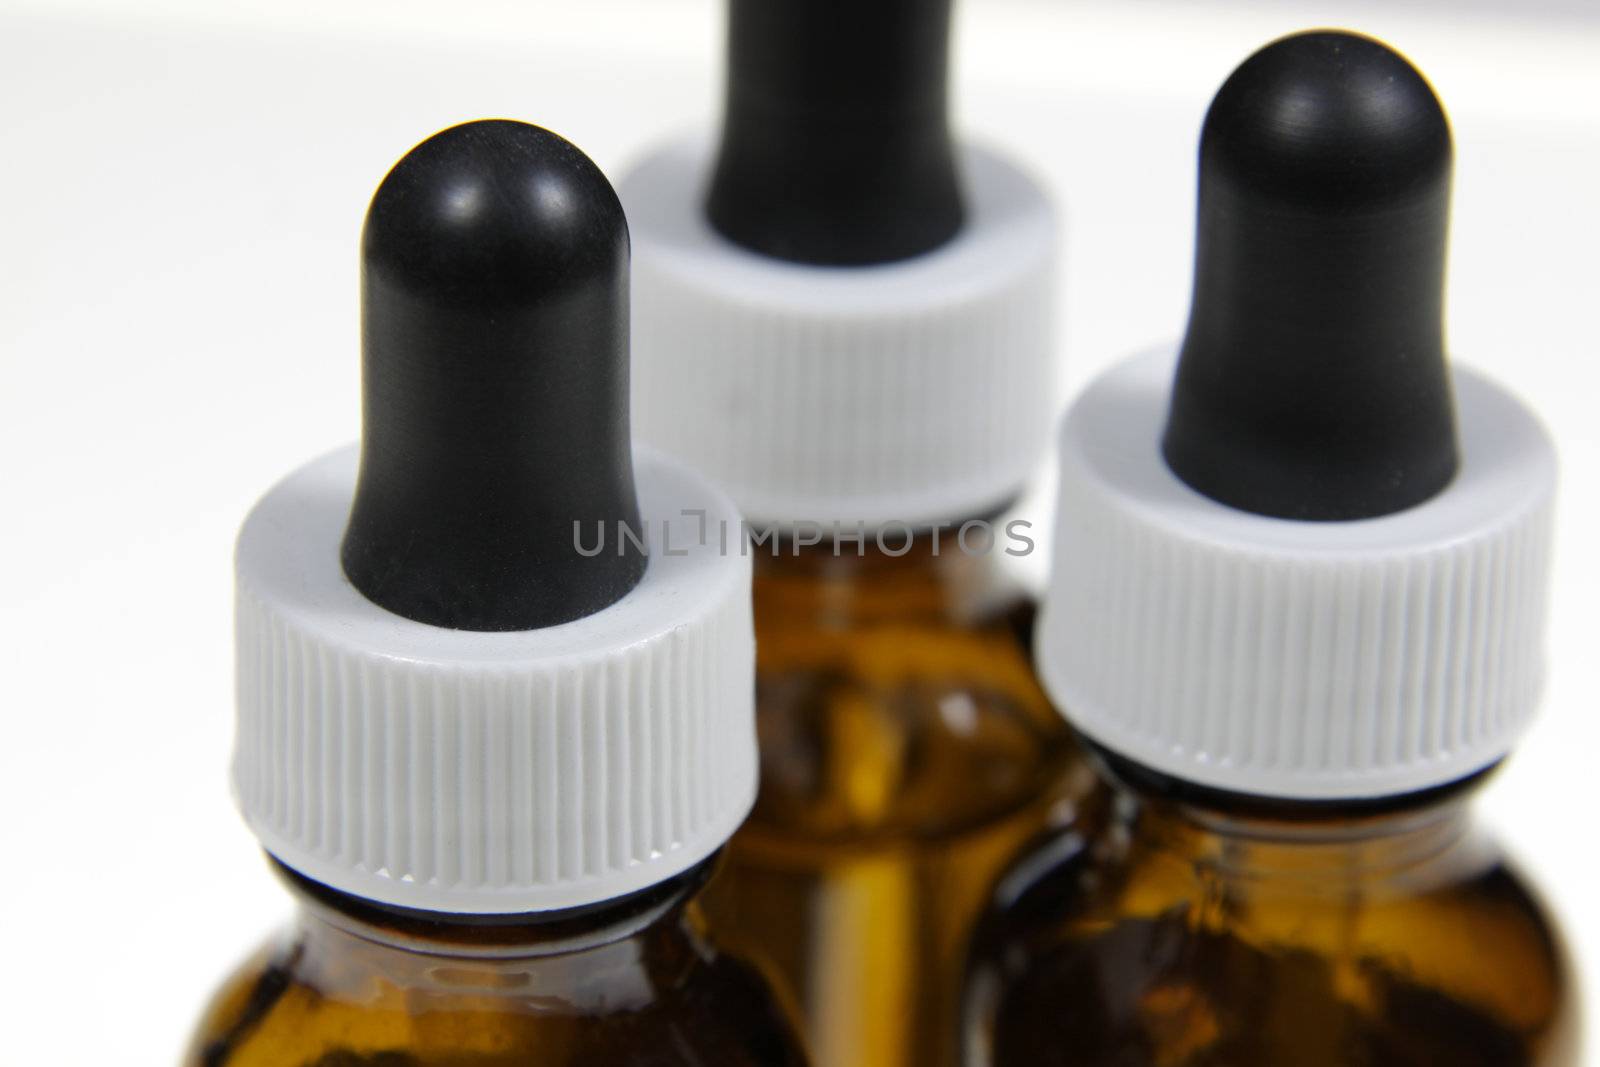 Three dropper bottles containing naturopathic medicine, isolated on a white background.
